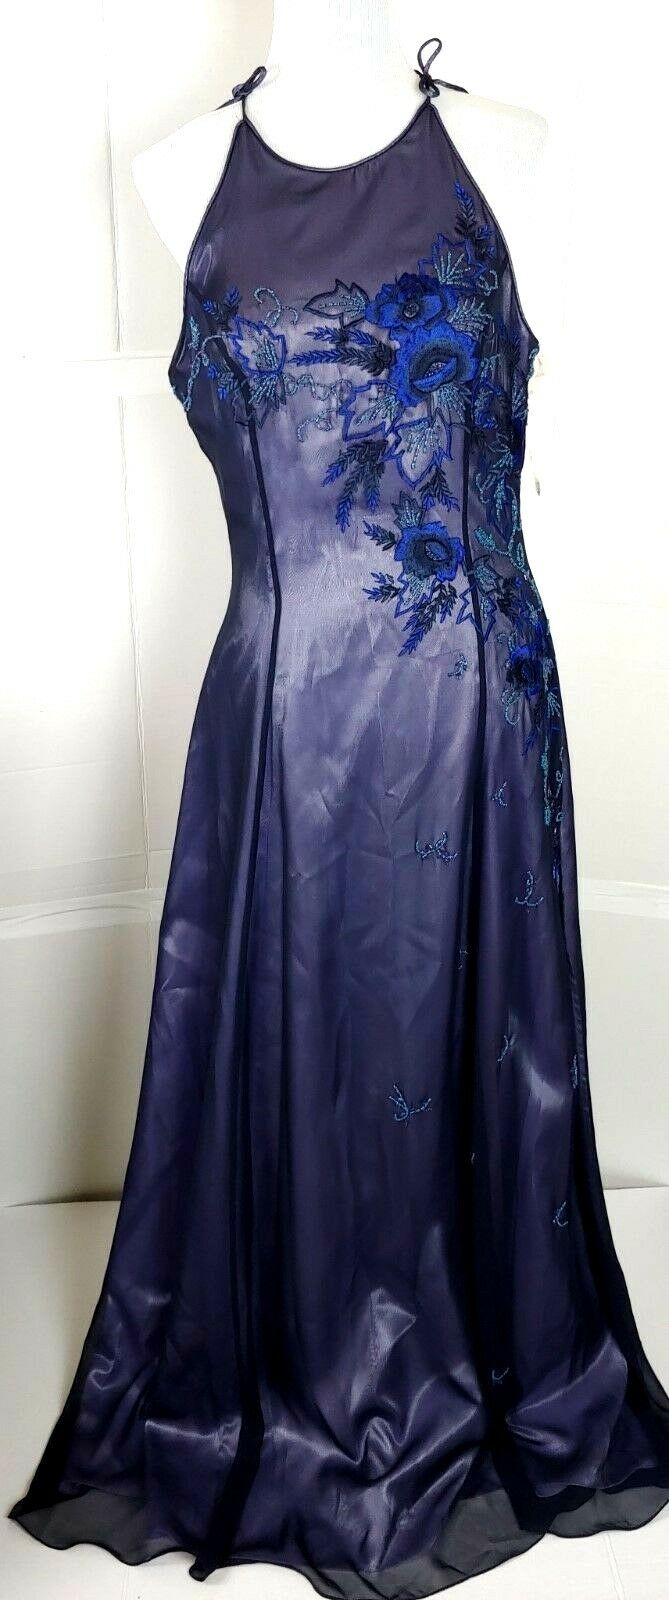 Vintage Formal Dress Navy Embroidered Bead Homecoming Prom Evening Sz 14 NWT